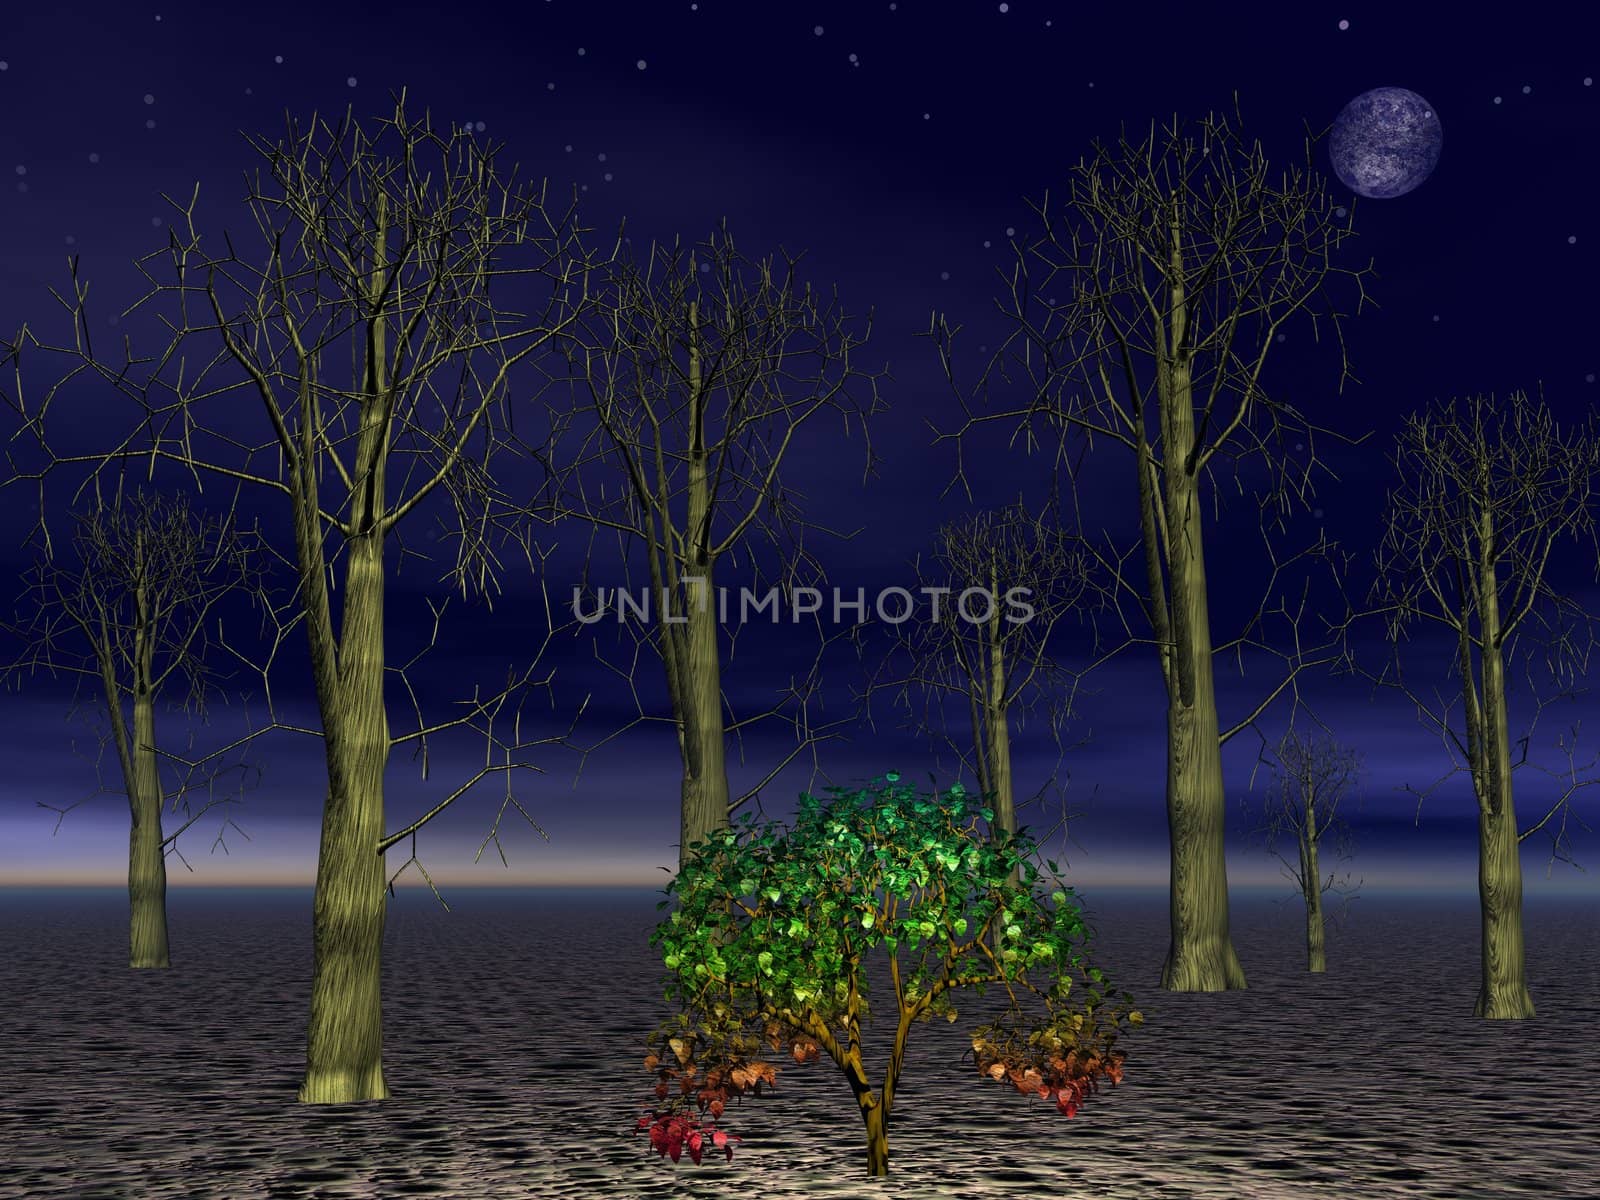 Small green tree alive among big dead forest trees by night with full moon